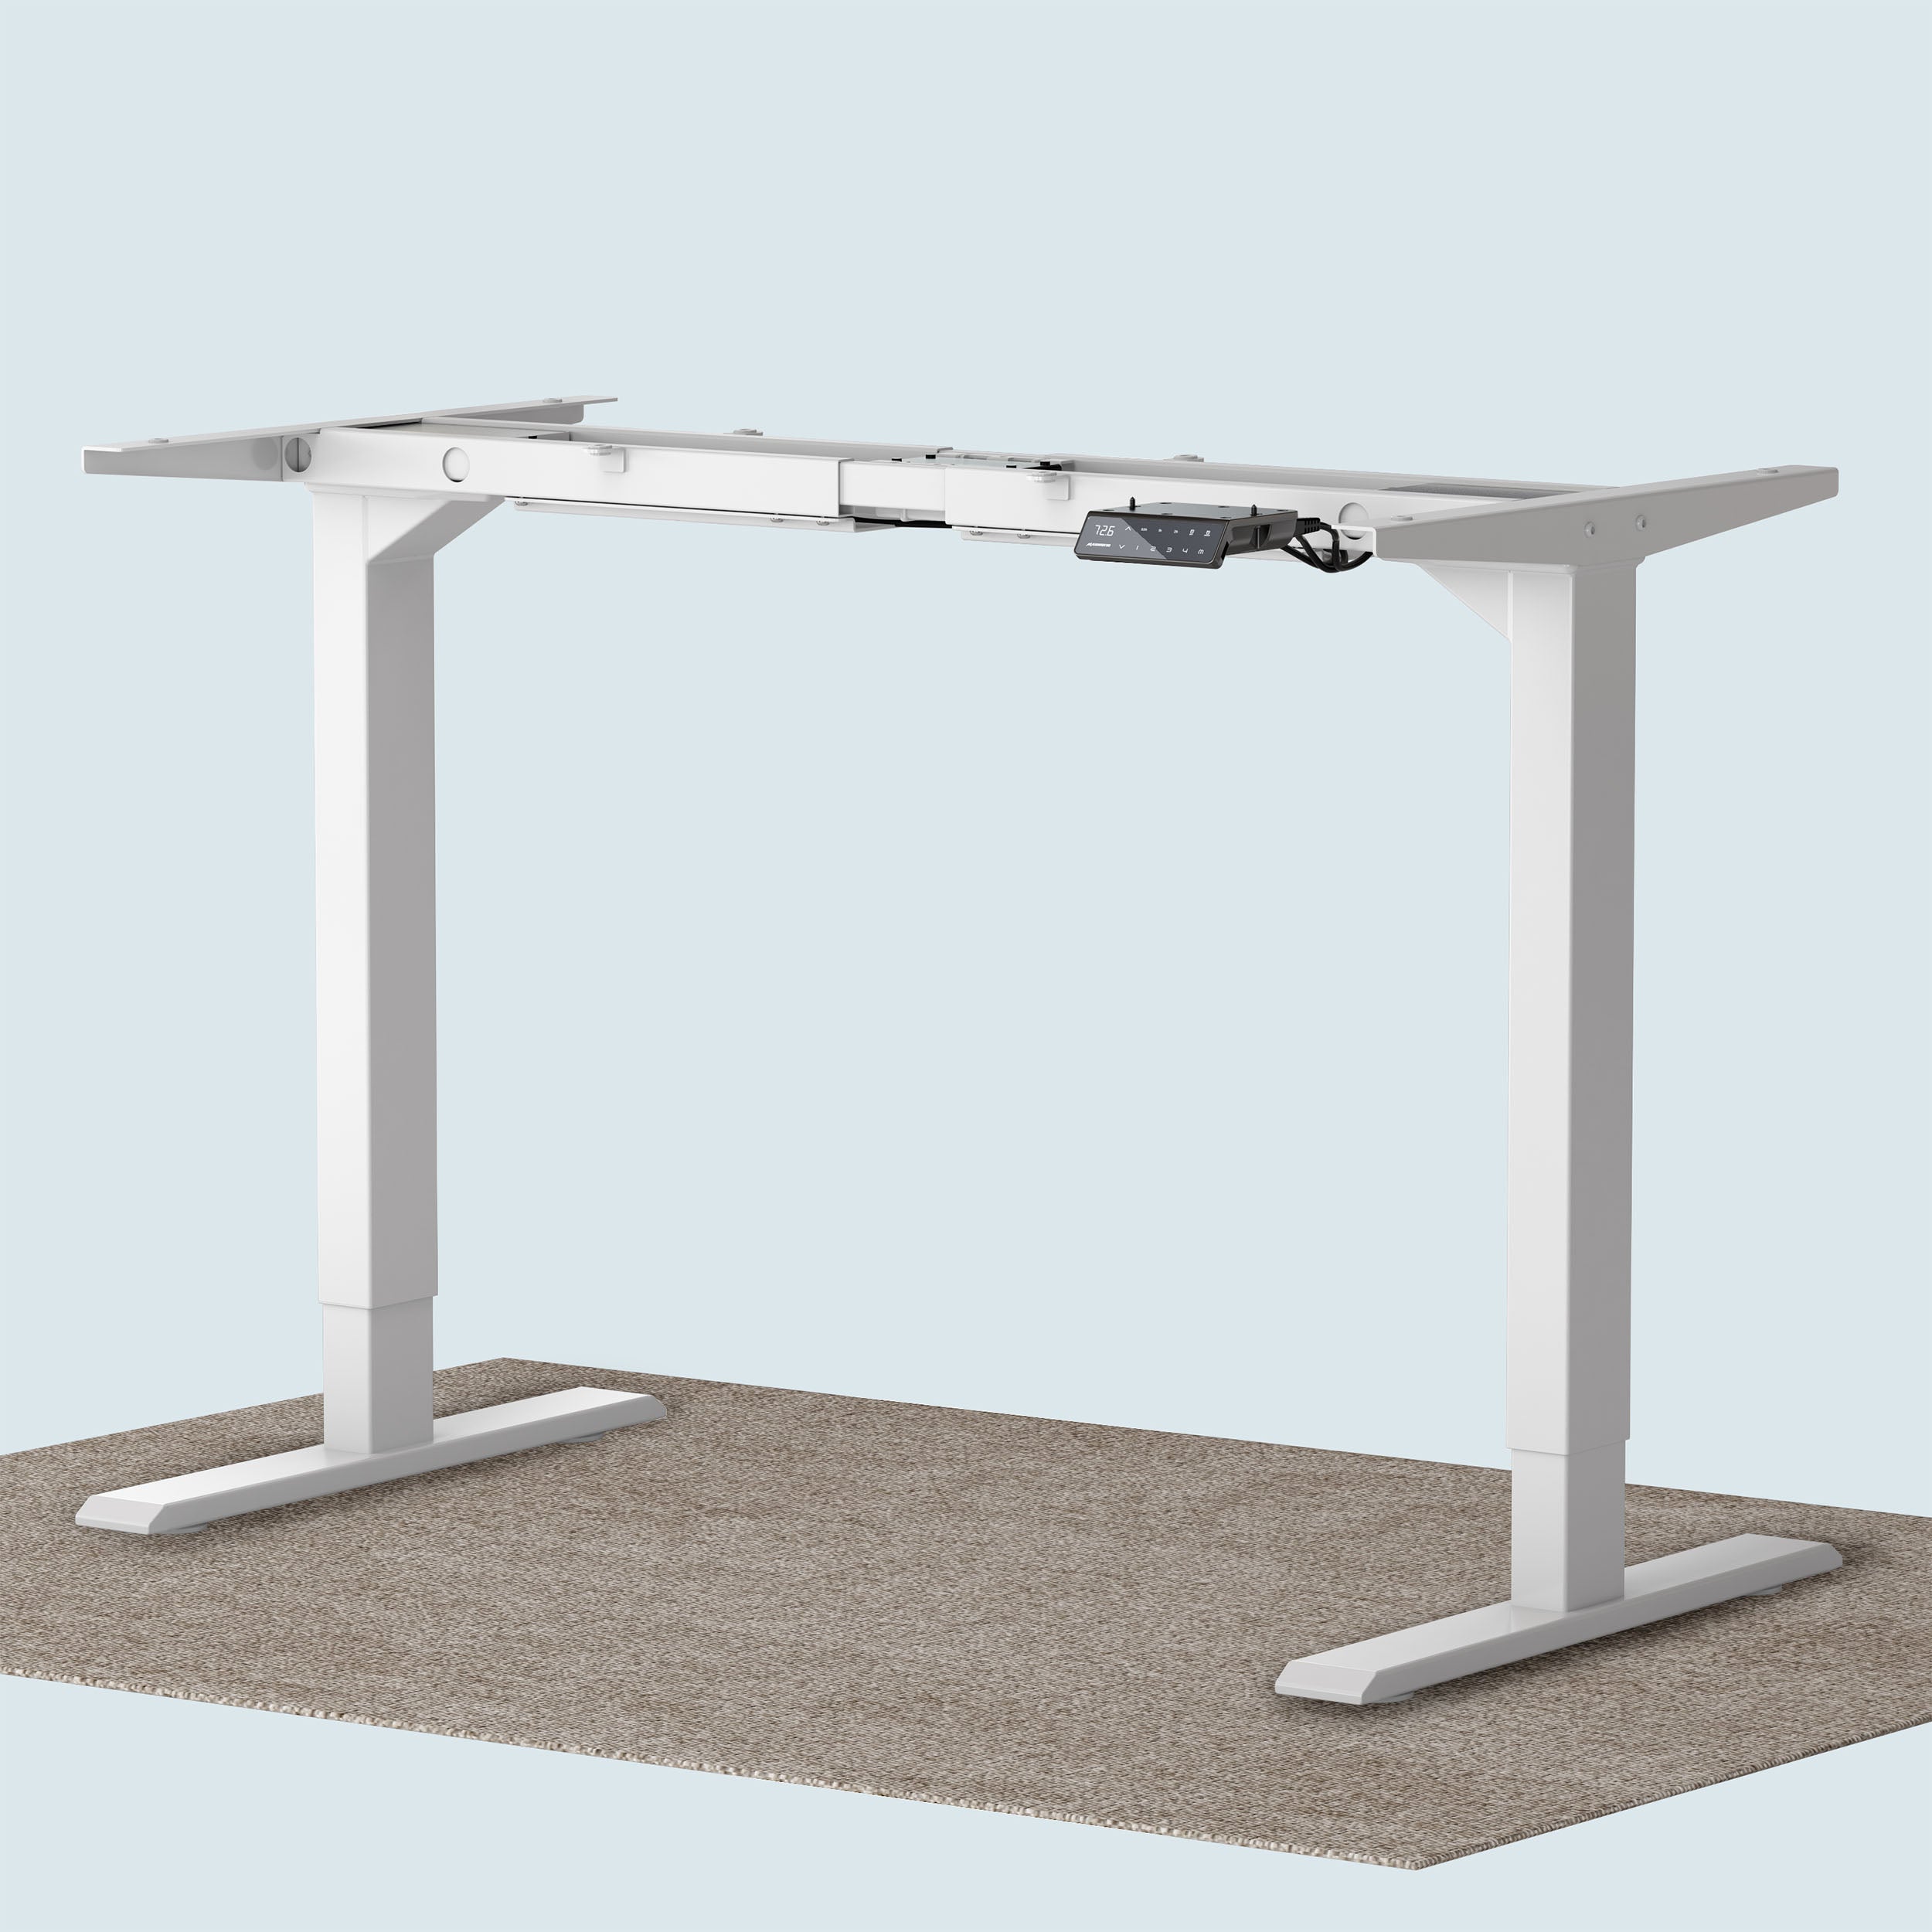 Maidesite T2 Pro electric height adjustable desk frame white